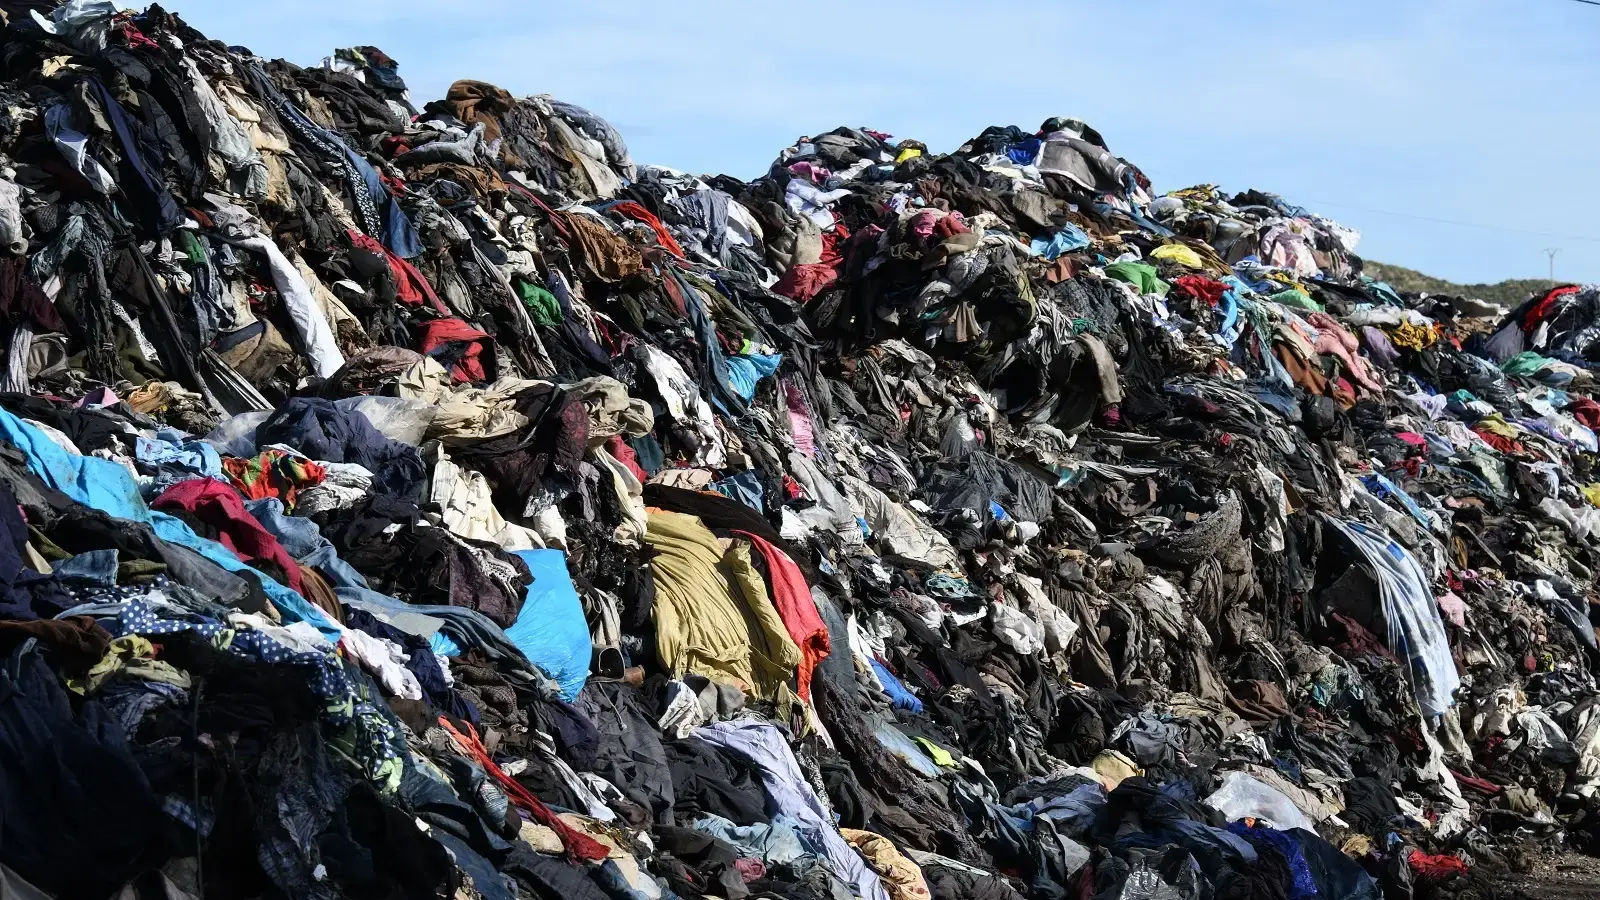 Should we put fast fashion in the recycling bin?